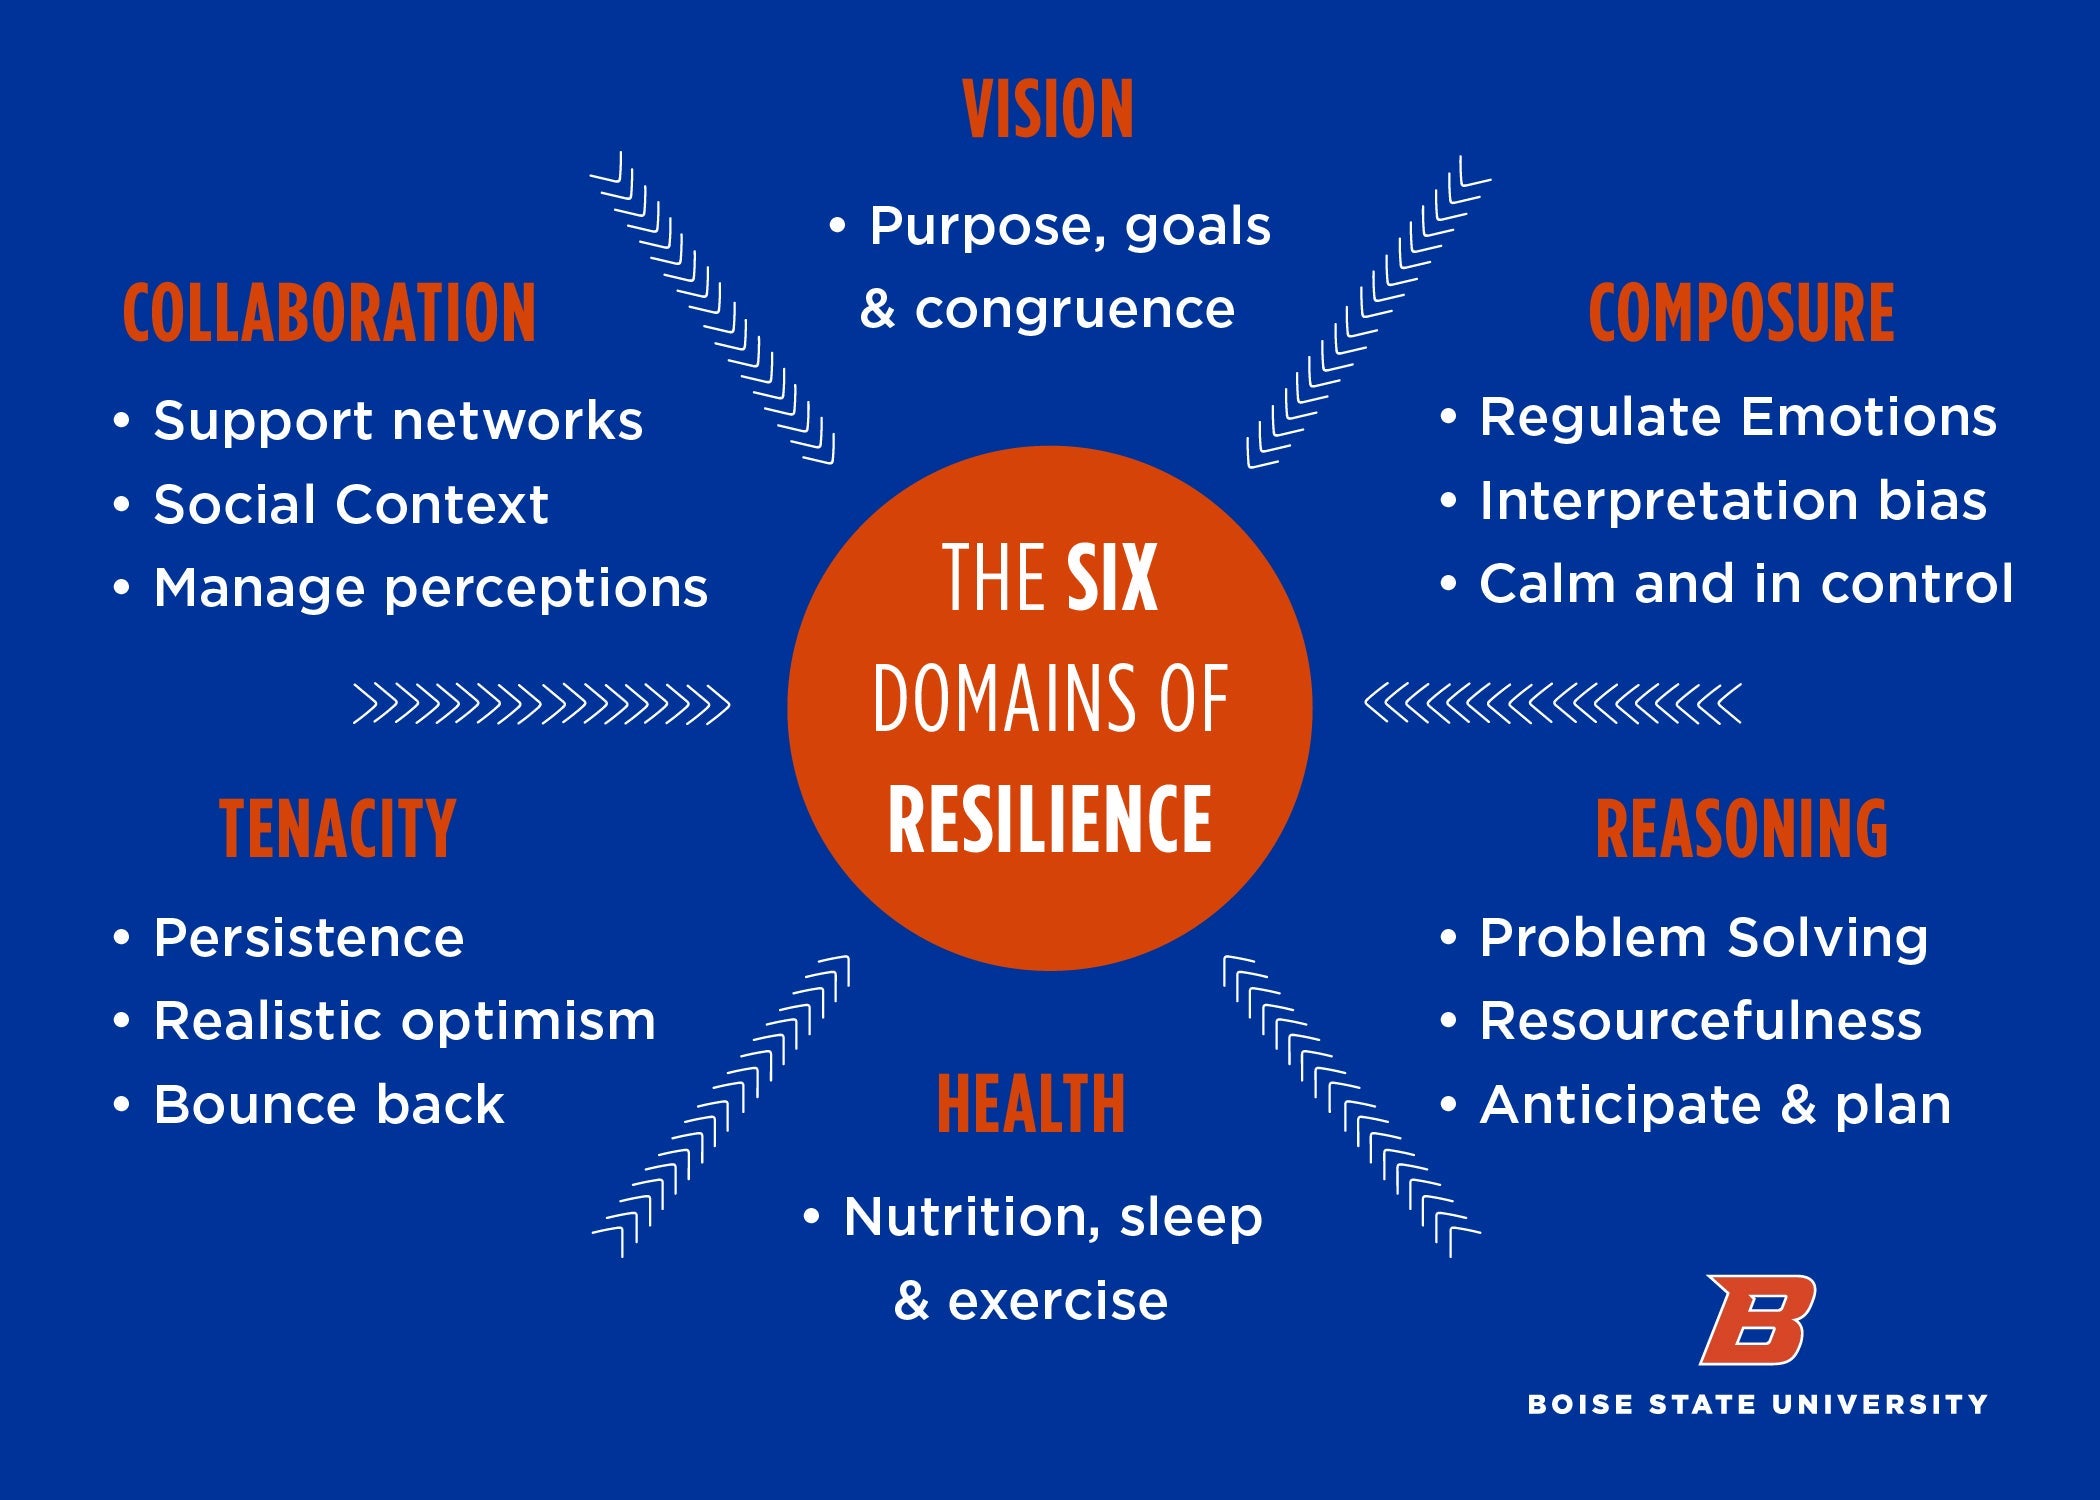 The 6 domains of resilience are vision, collaboration, composure, reasoning, health, and tenacity